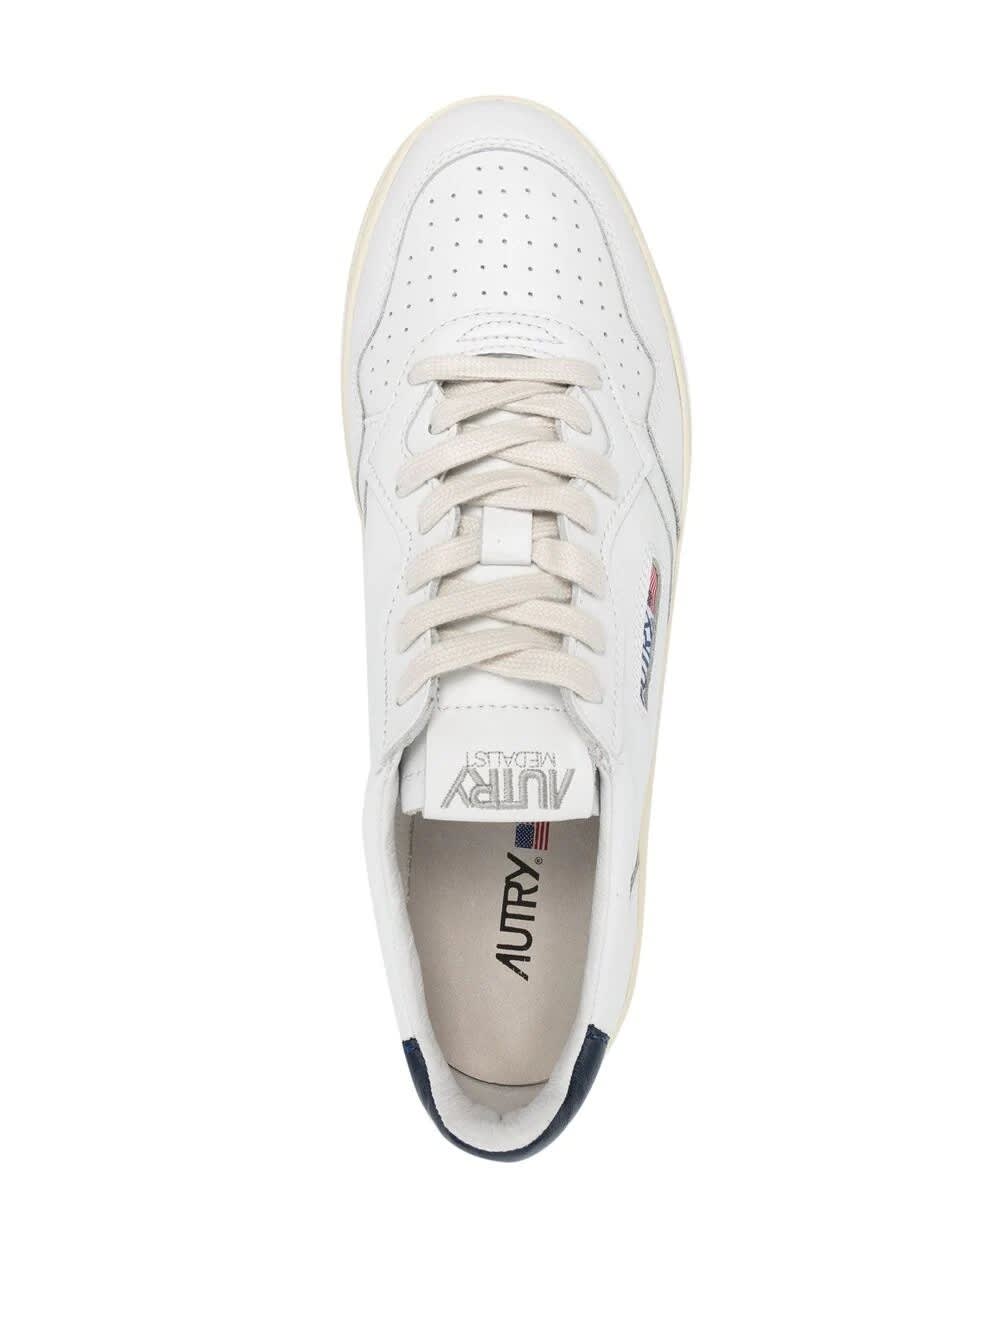 Shop Autry Medalist Low Sneakers In White And Navy Blue Leather In Black